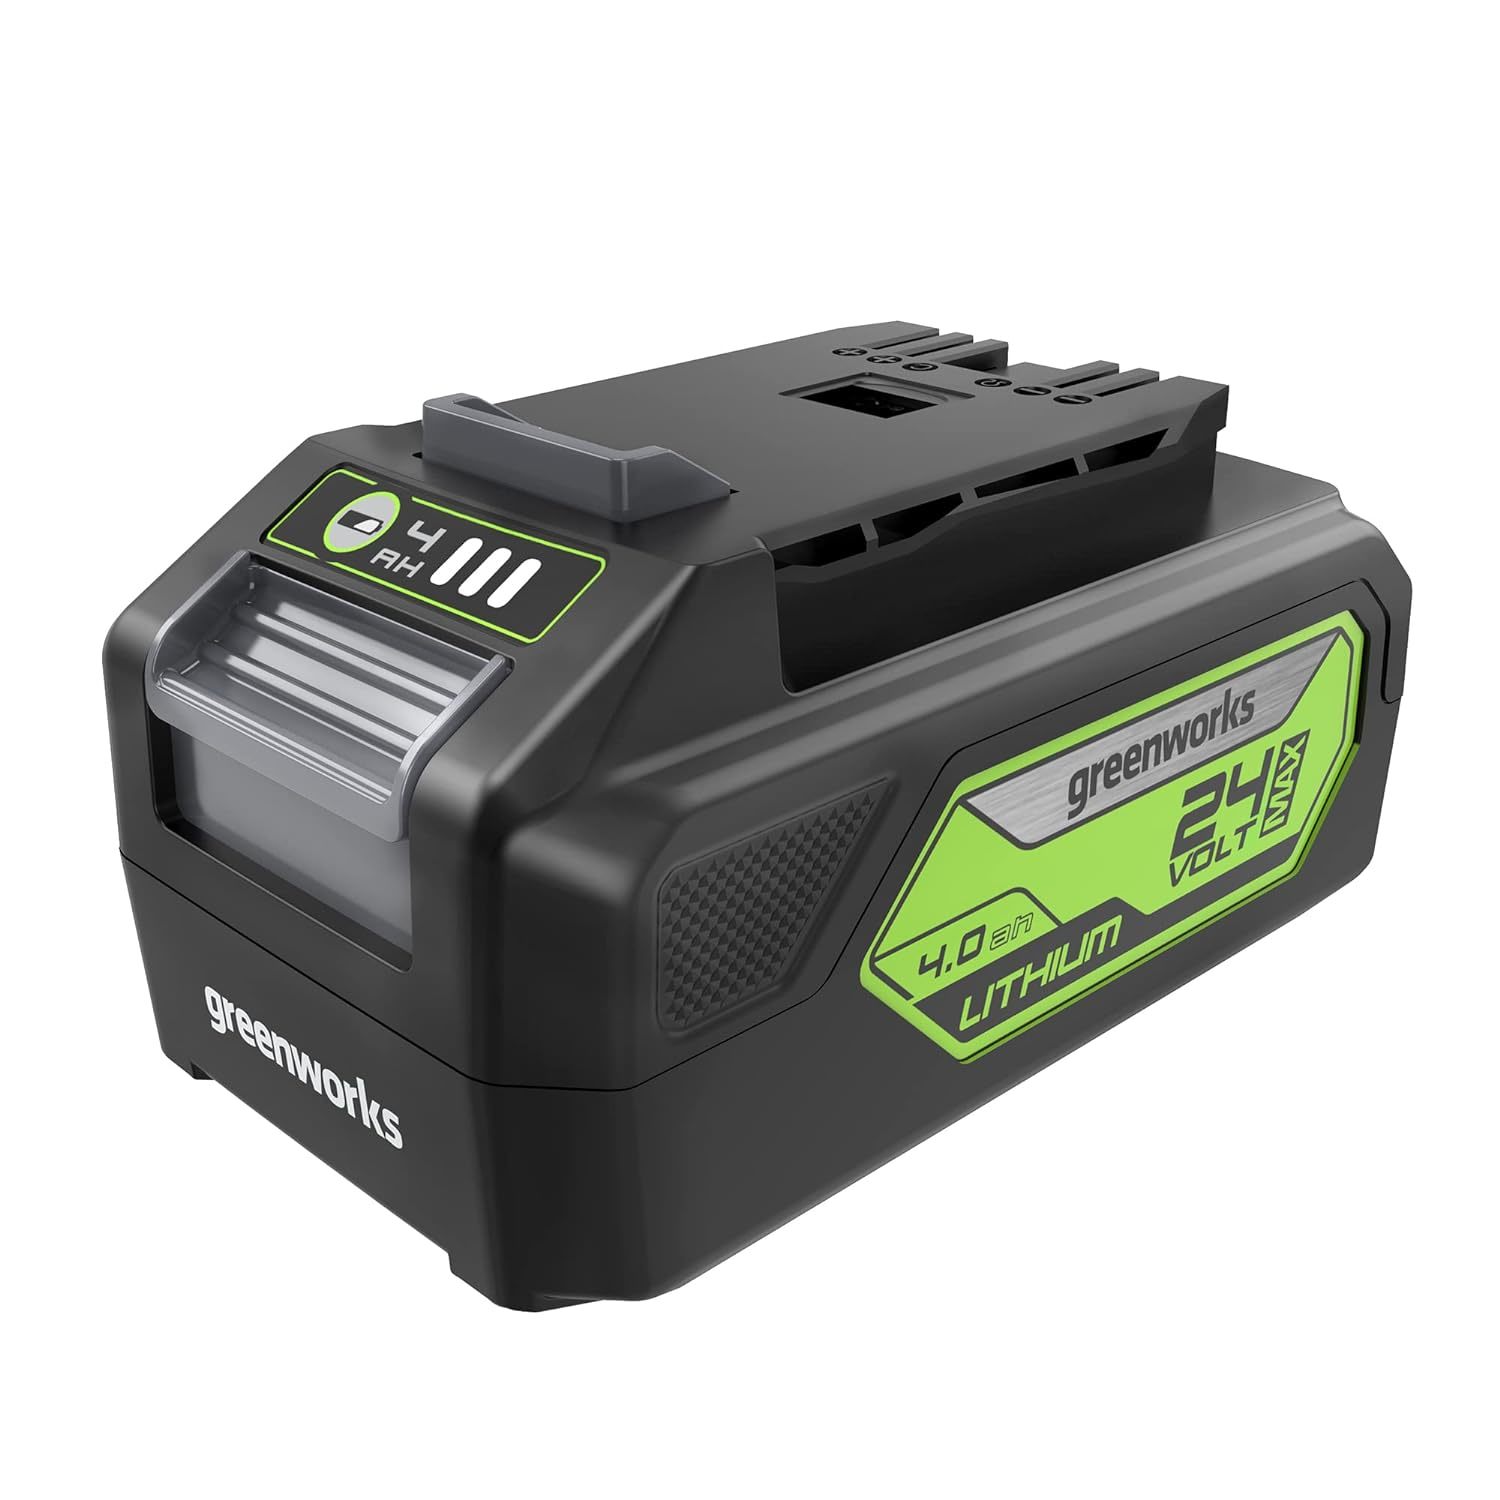 Primary image for Greenworks 24V 4.0Ah Lithium-Ion Battery (Genuine Greenworks Battery/ 125+ Compa